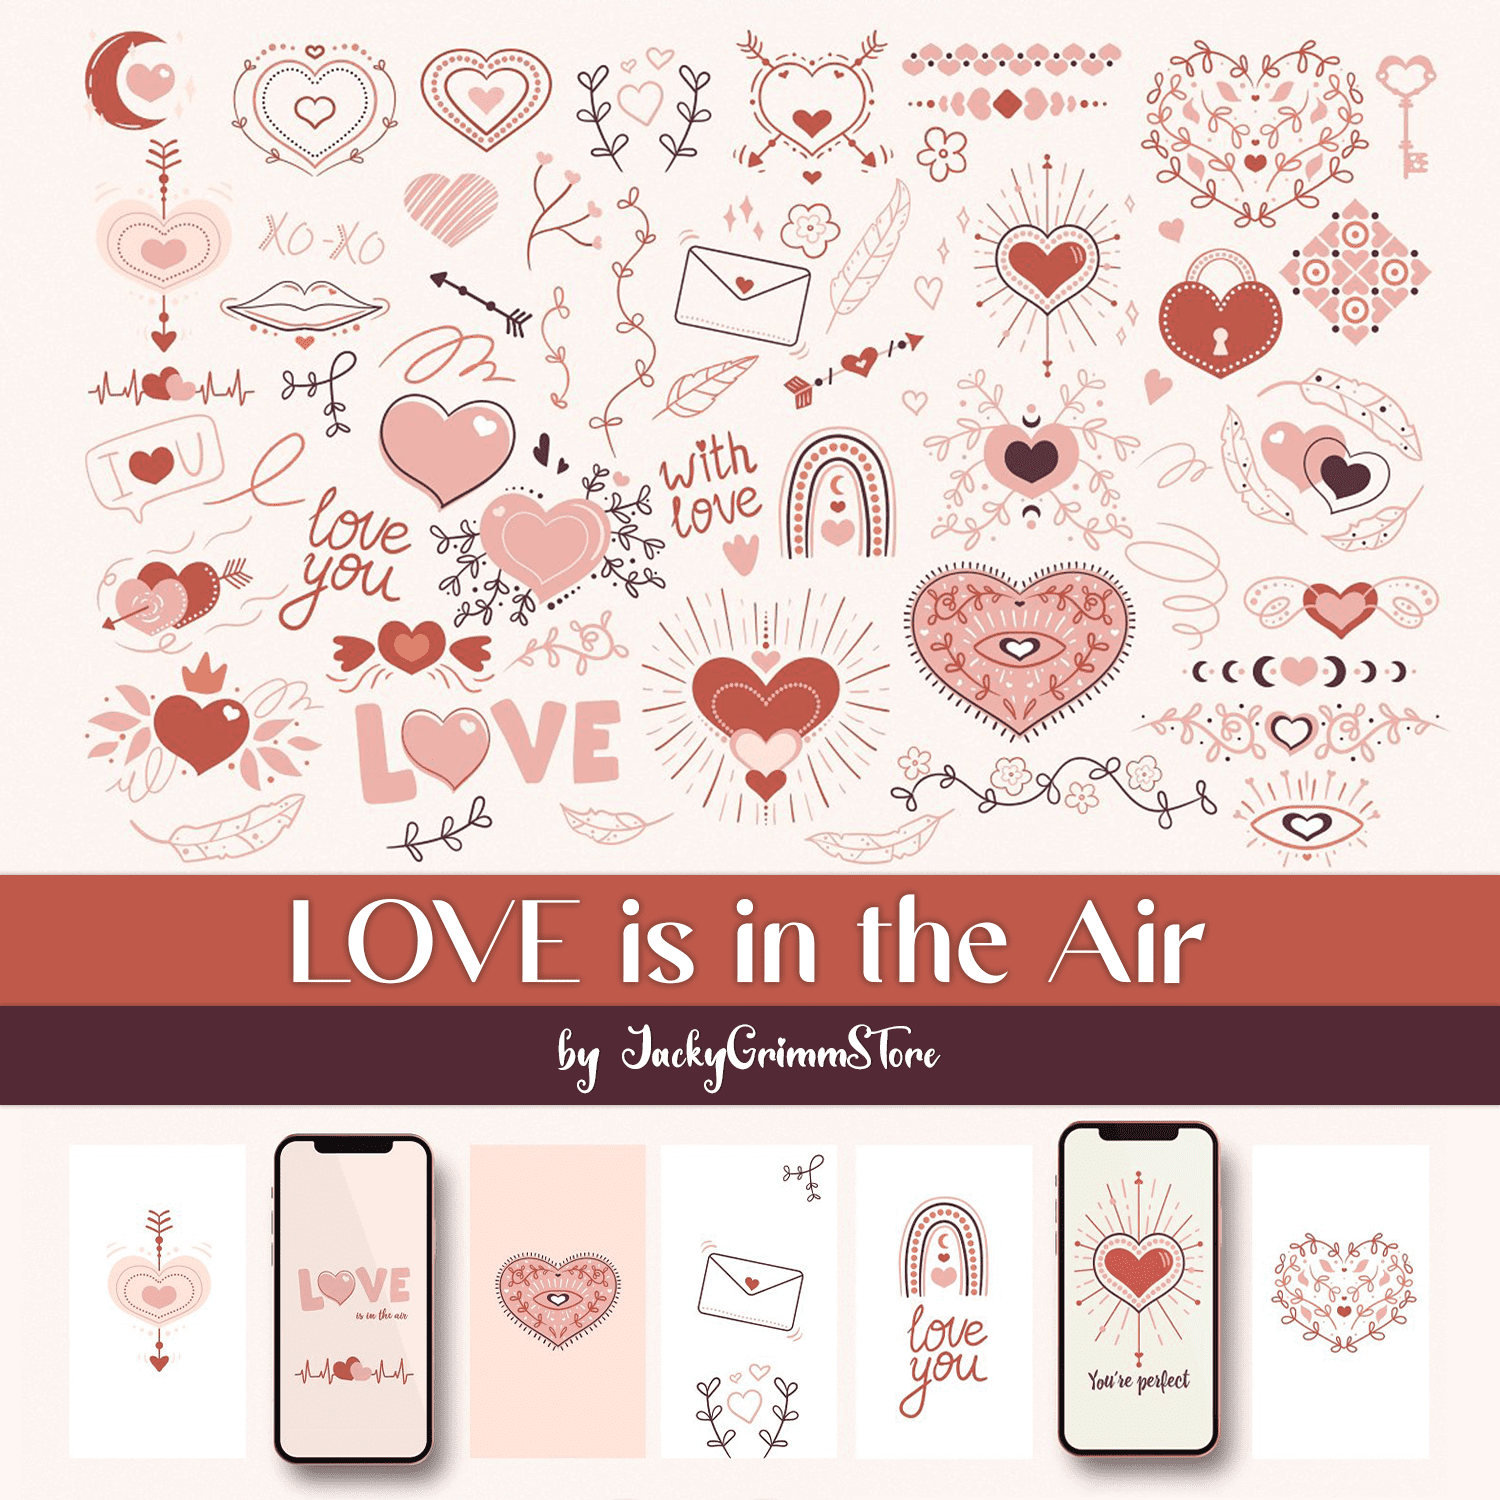 LOVE is in the Air.